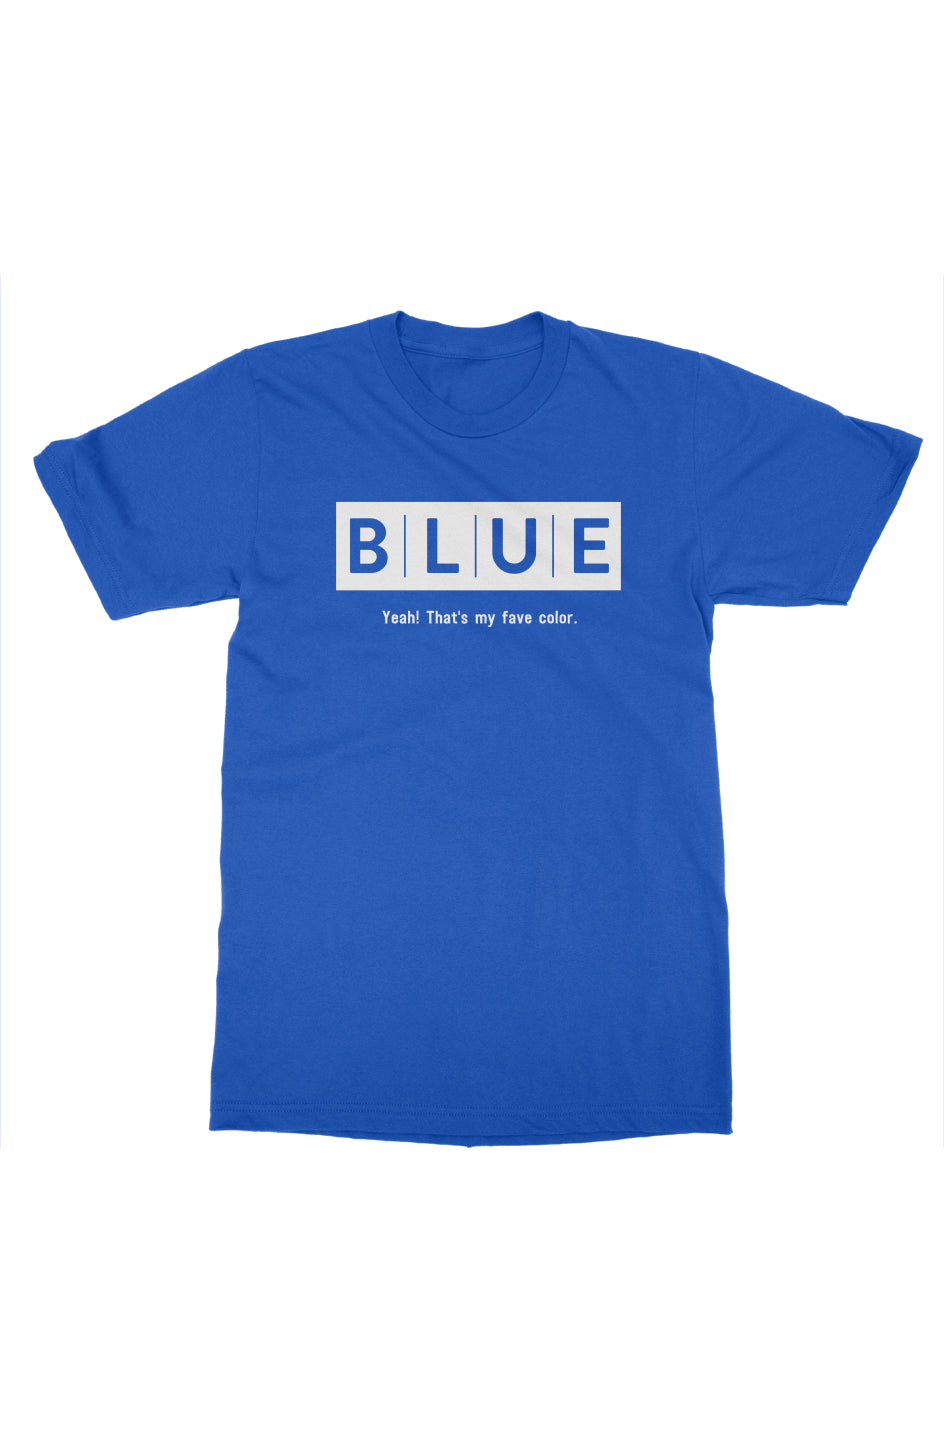 Blue Collection Fave crew tshirt